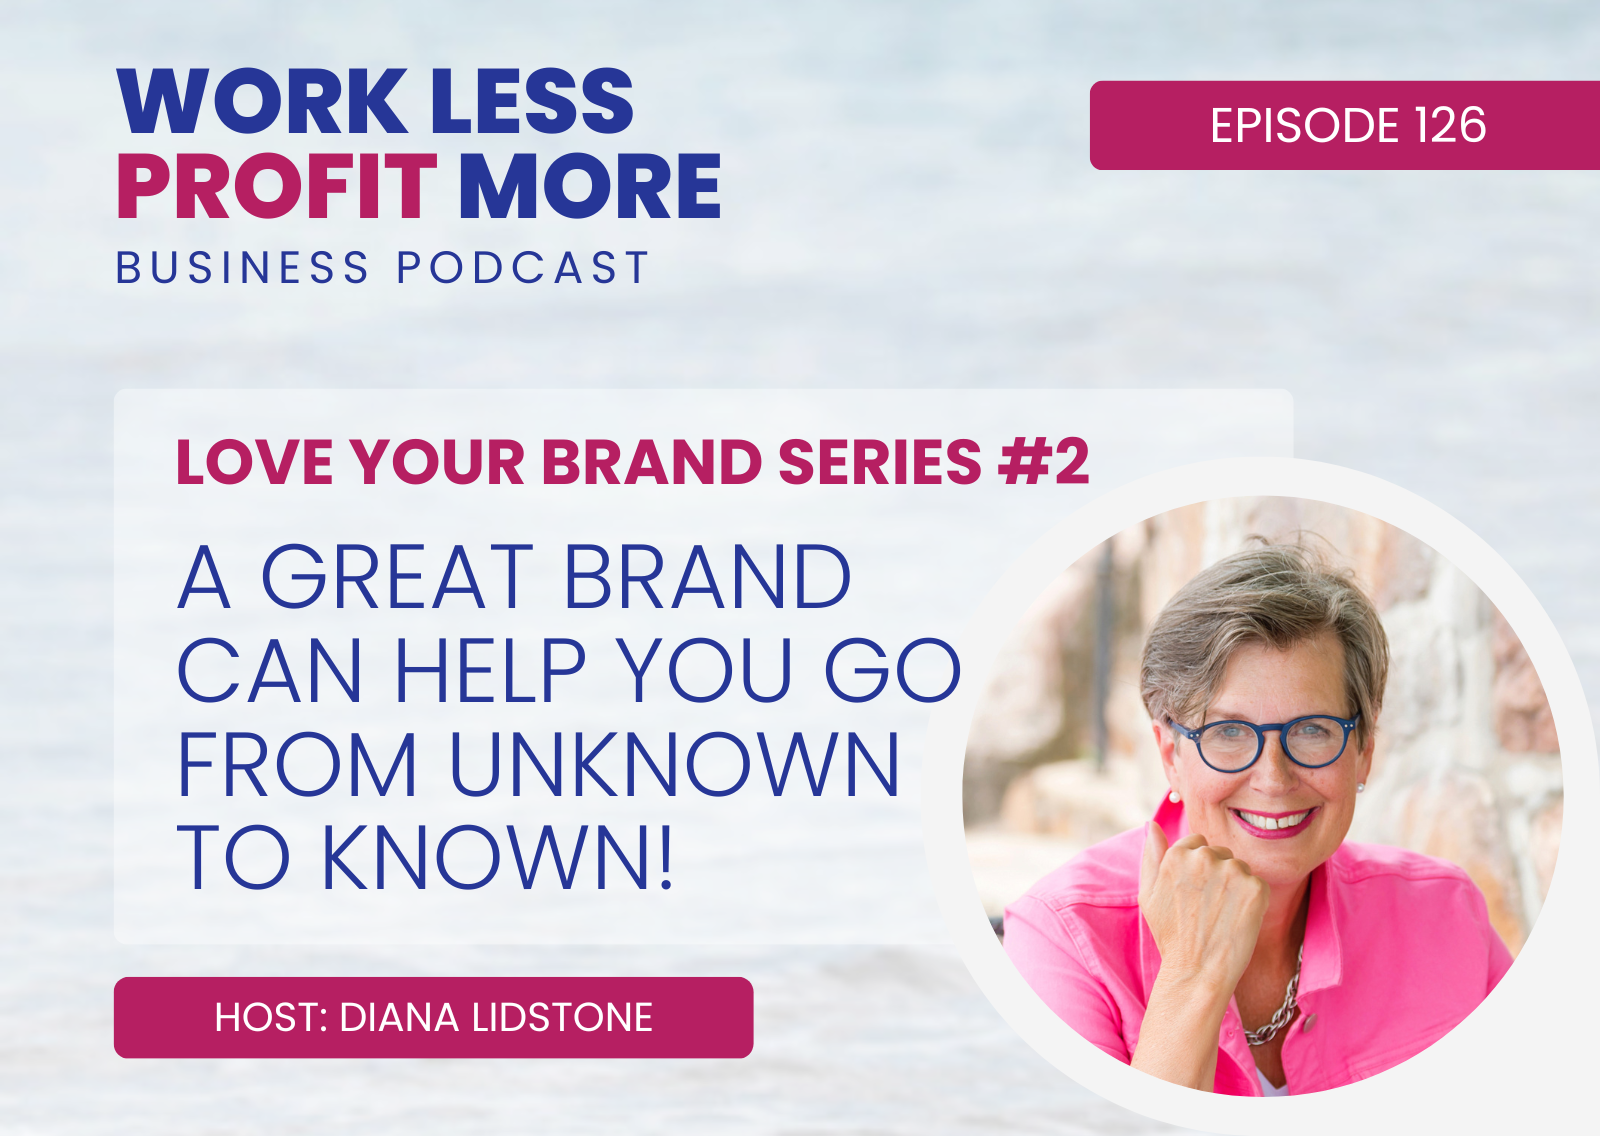 S4 Ep 126 Work Less Profit More Podcast